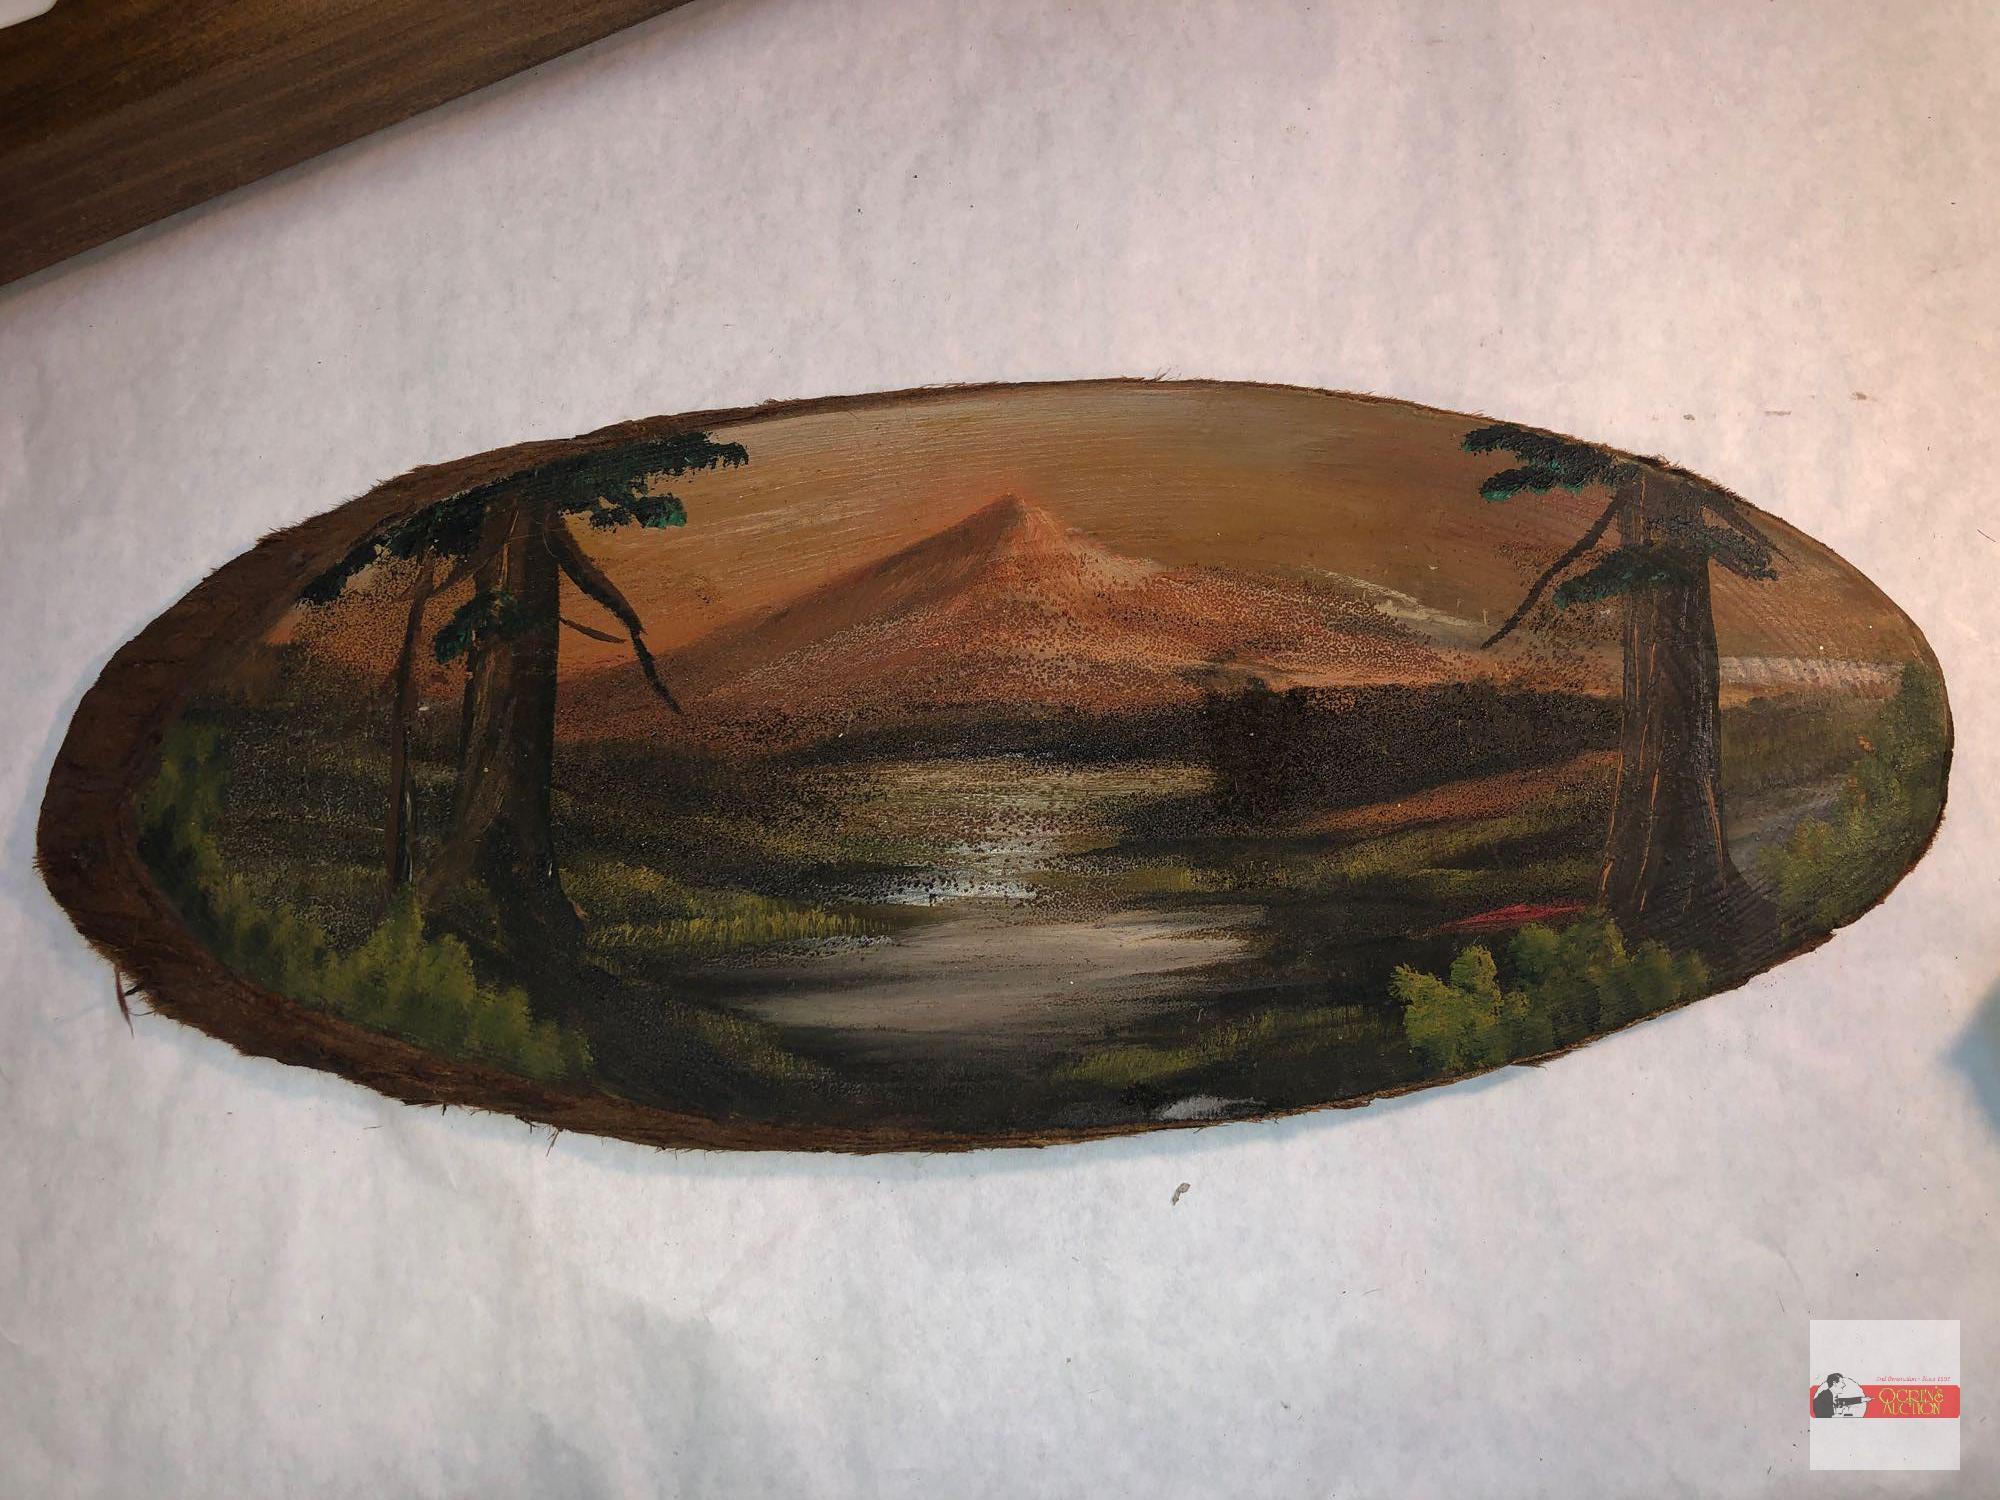 3 wooden items - oval artwork hand painted 16"wx6.5"h, Wooden shelf rack 12.5"wx4.75"h & wooden wall